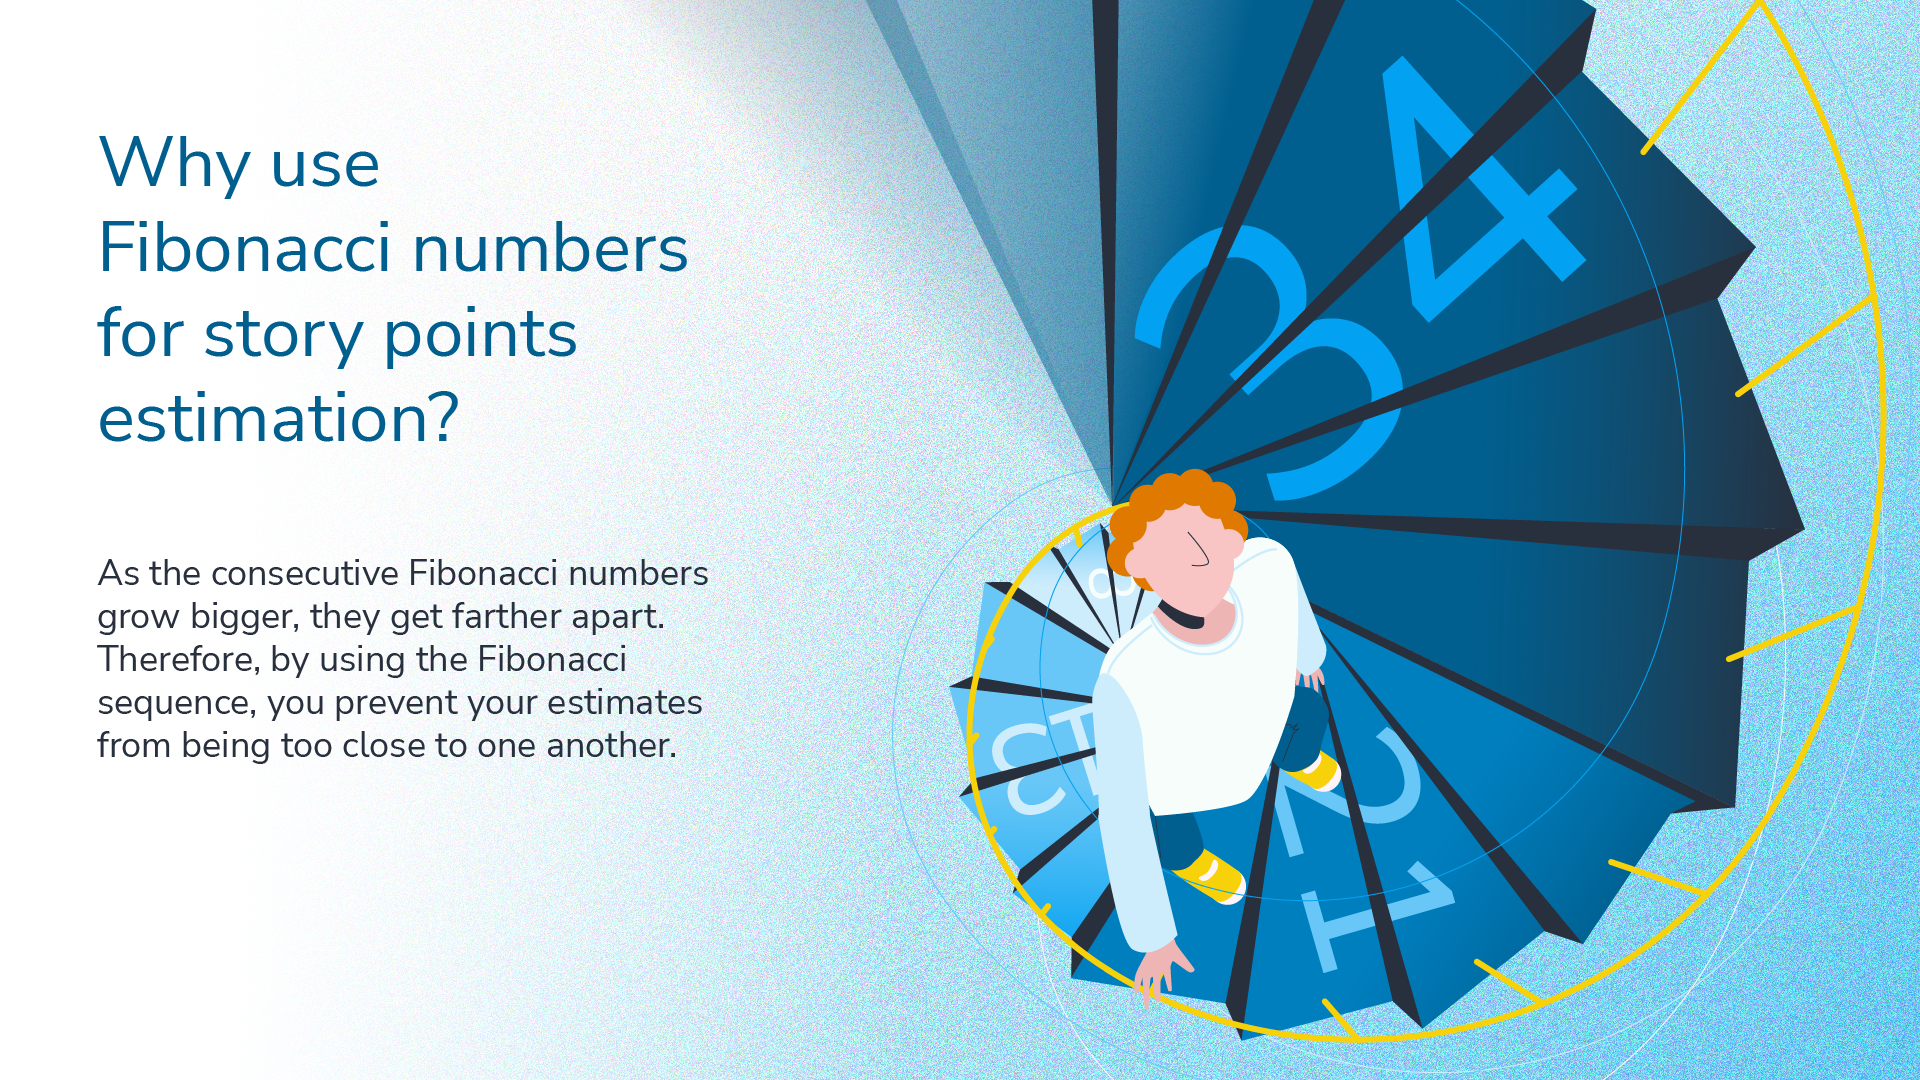 Why use Fibonacci numbers for story points estimation? As the consecutive Fibonacci numbers grow bigger, they get farther apart. Therefore, by using the Fibonacci sequence, you prevent your estimates from being too close to one another.